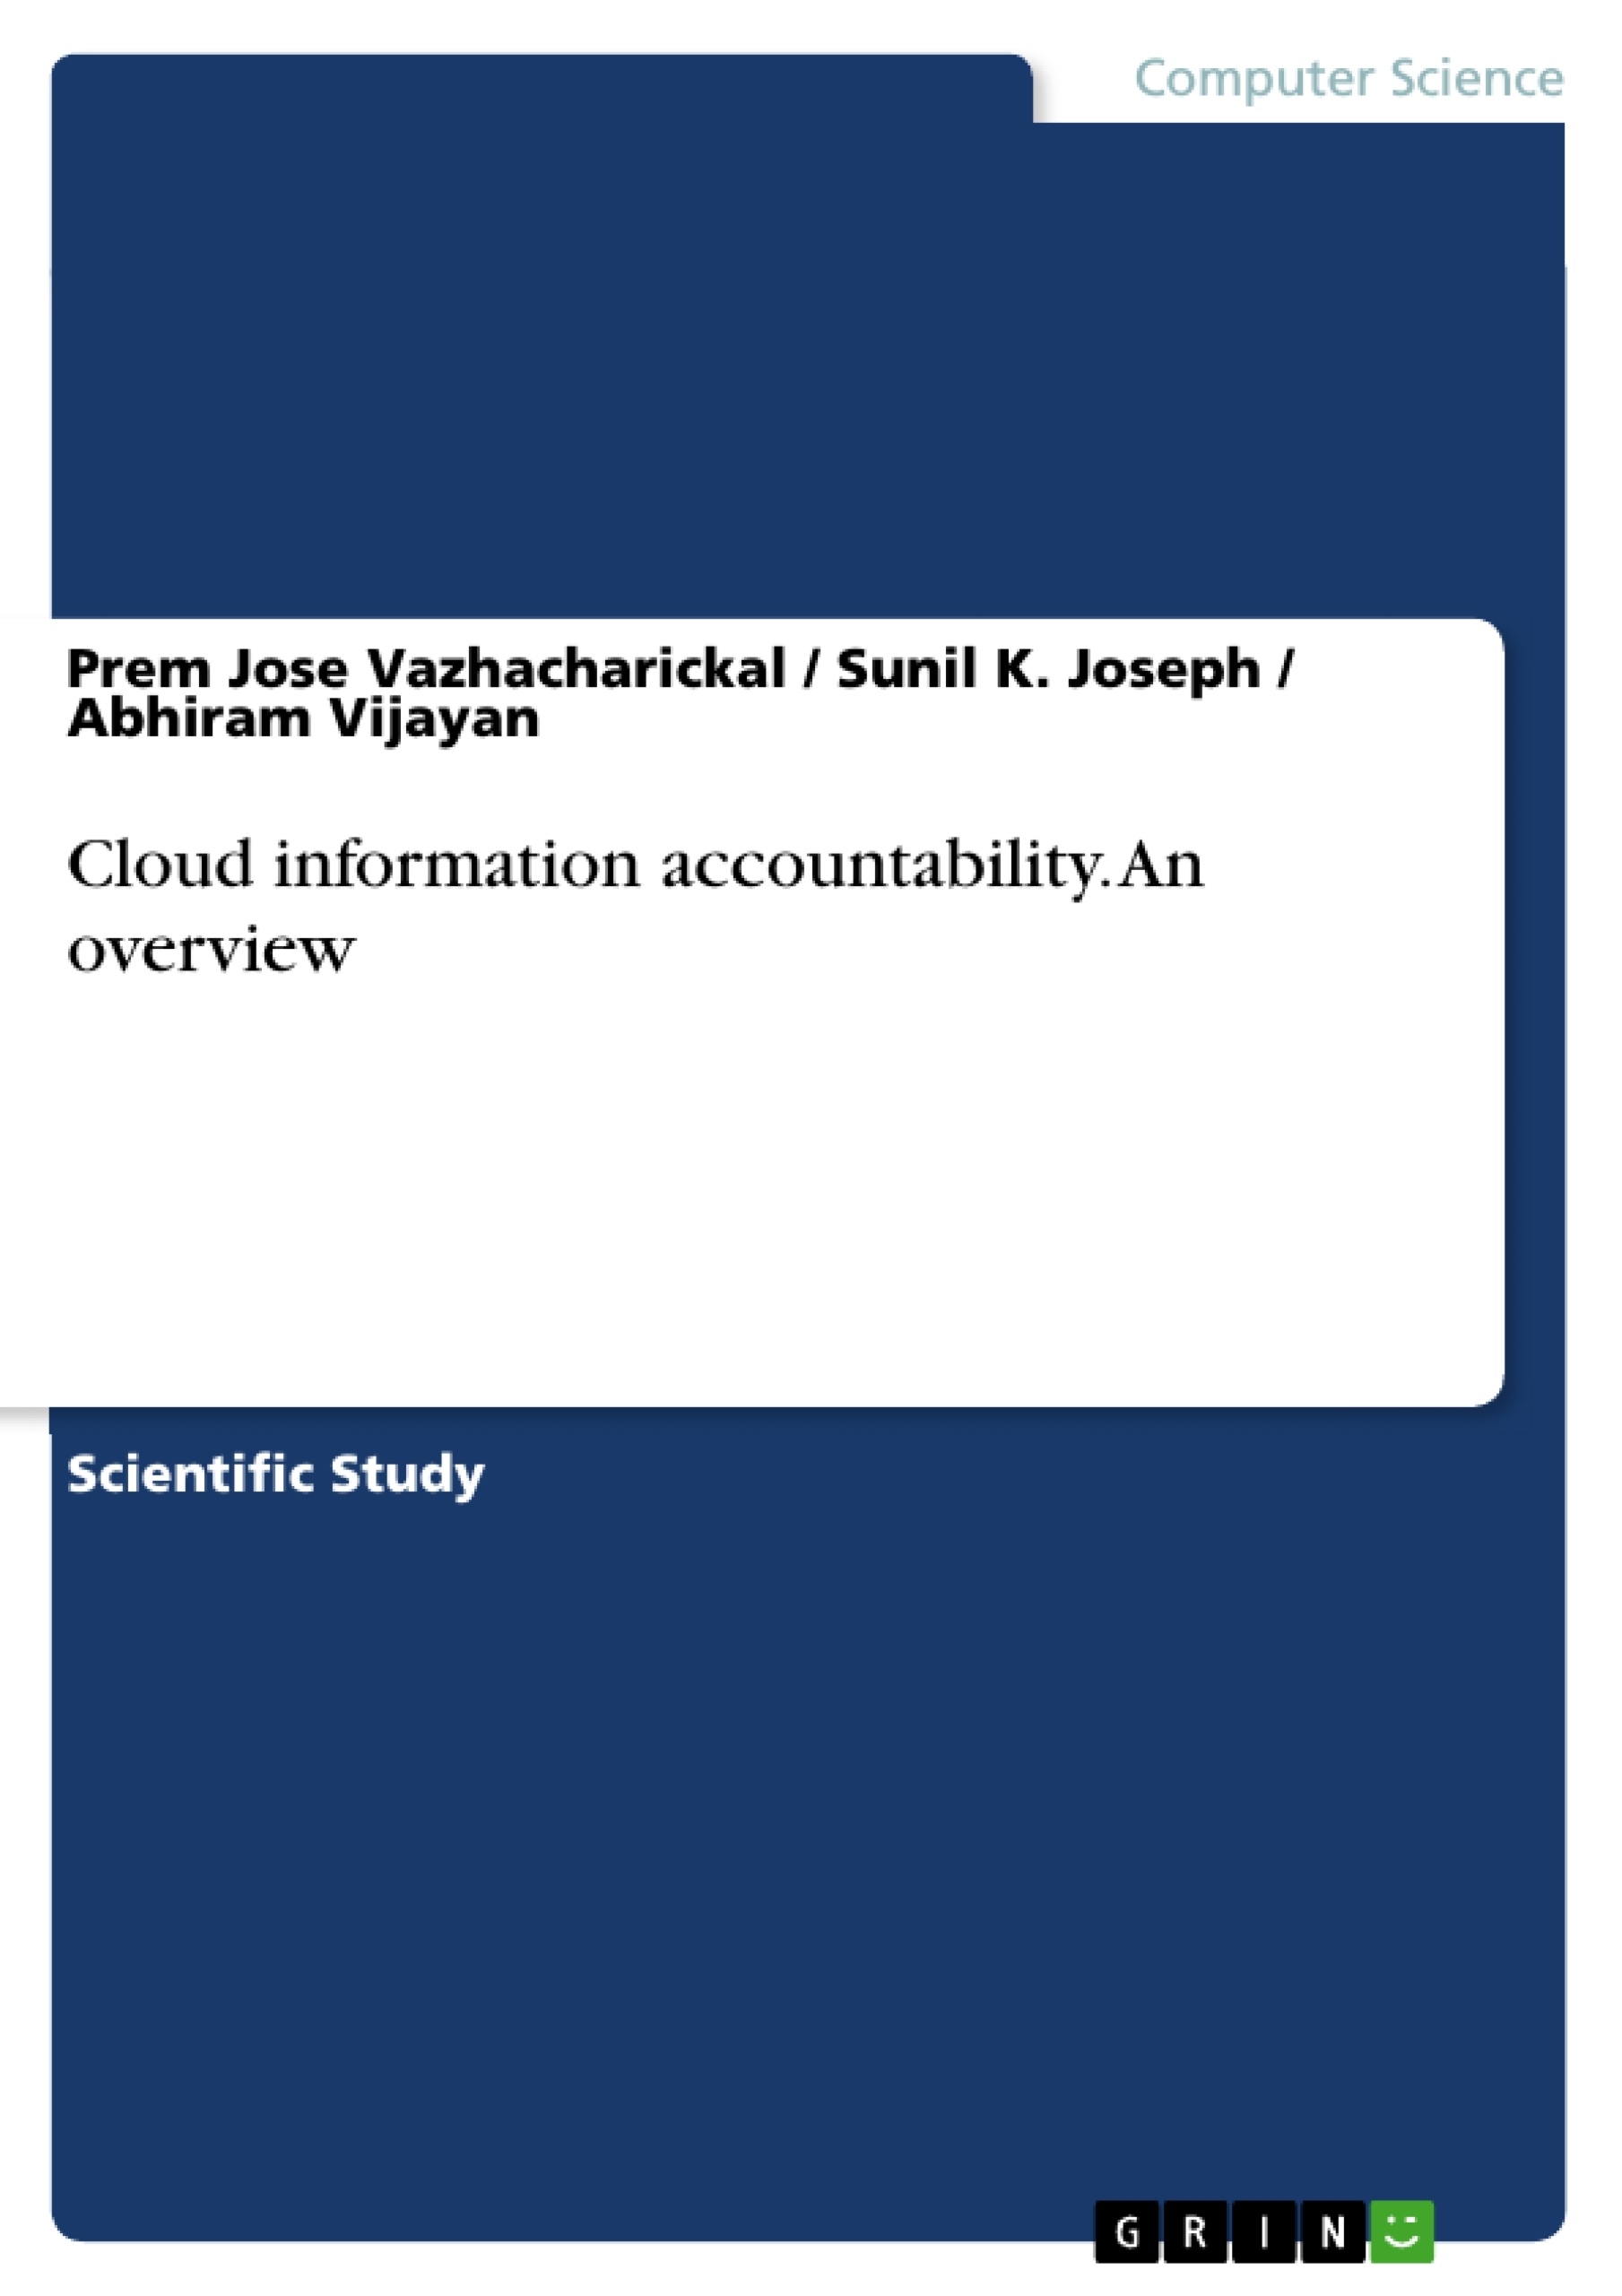 Titel: Cloud information accountability. An overview